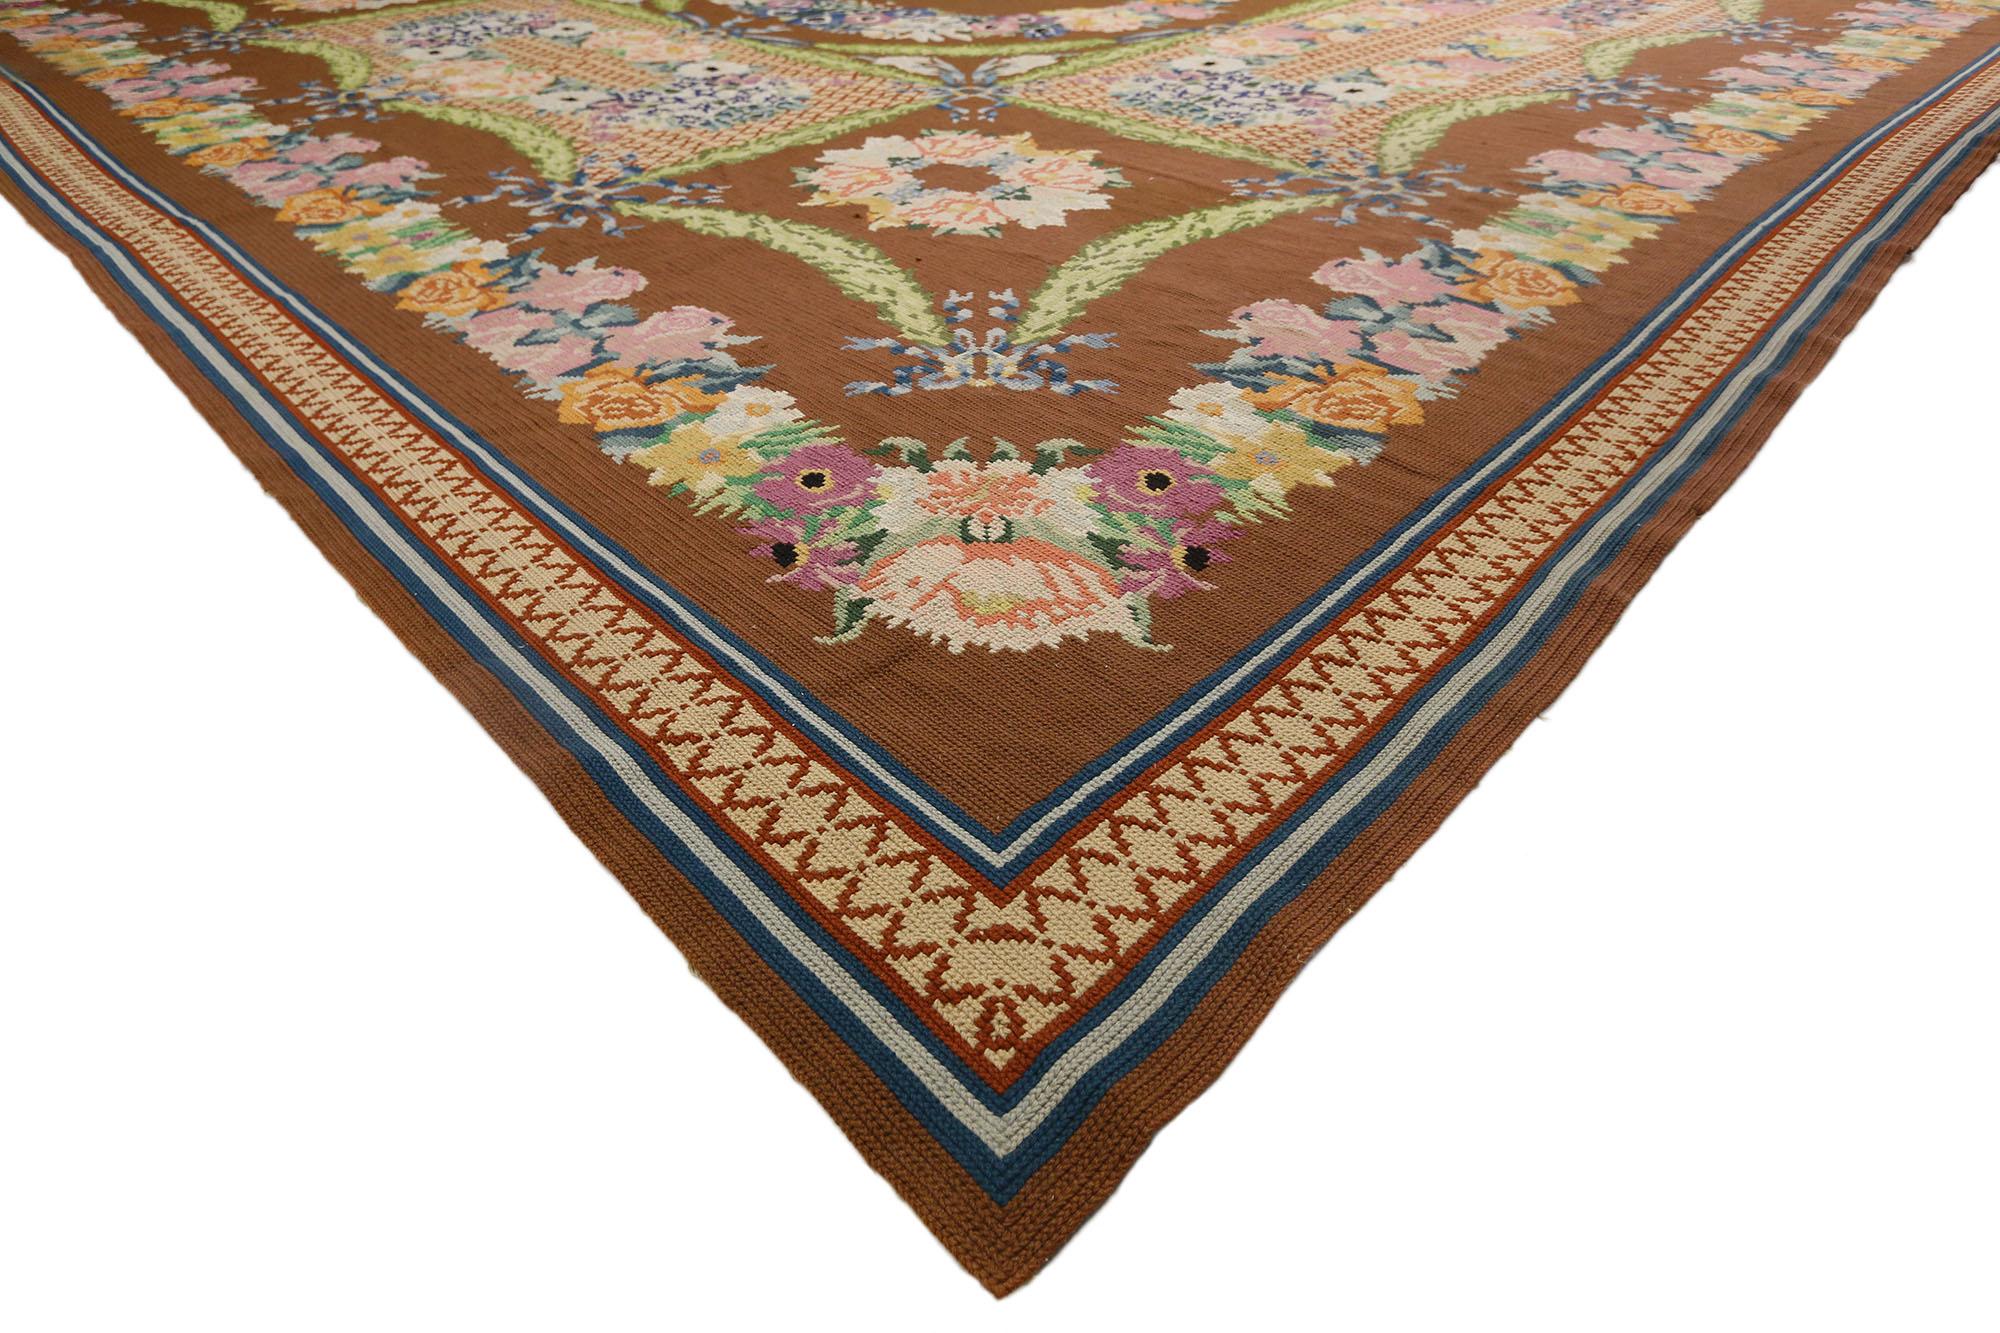 77321 Antique Portuguese Arraiolos Rug, 16'03 x 21'05.
French Romanticism meets Maximalism in this oversized antique Portuguese Arraiolos needlepoint rug. The highly decorative Aubusson design and happy hues woven into this piece work together